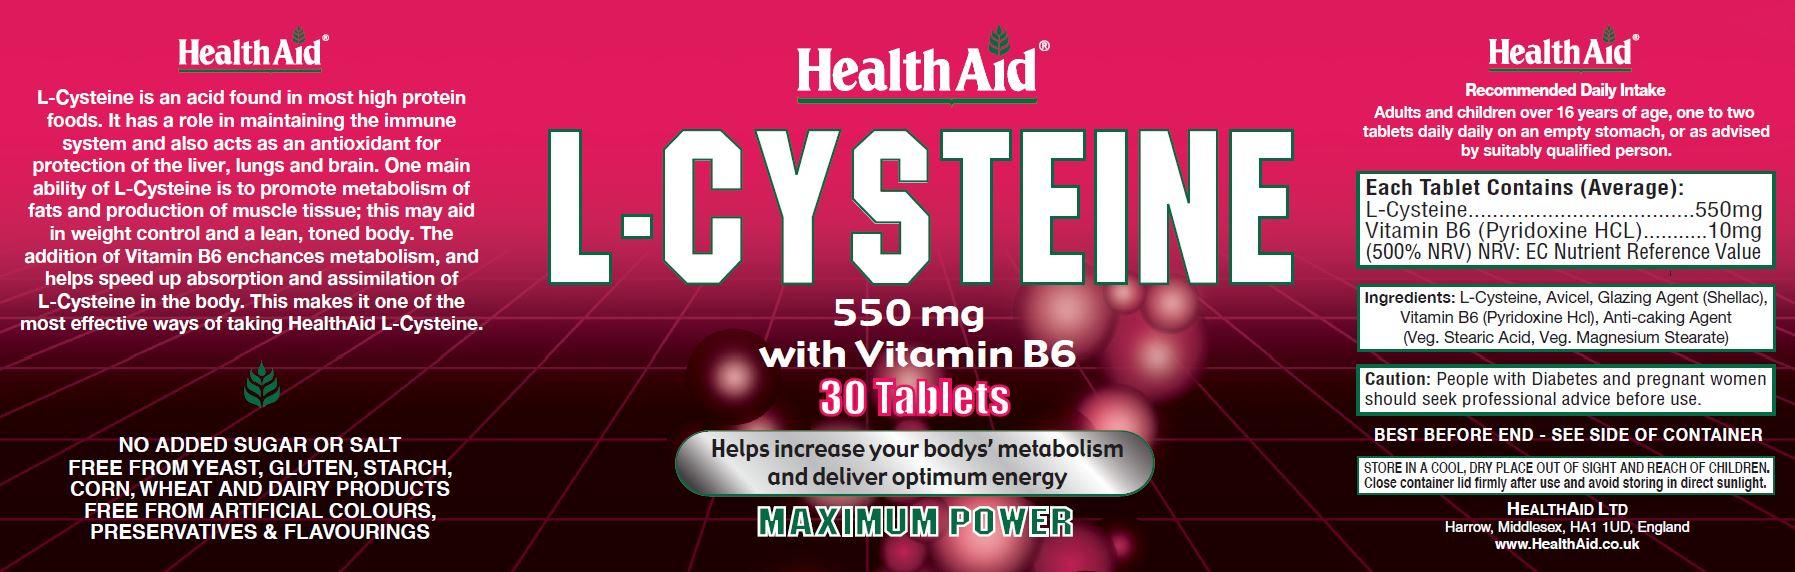 Health Aid L-Cysteine 550mg with Vitamin B6  30's - Approved Vitamins